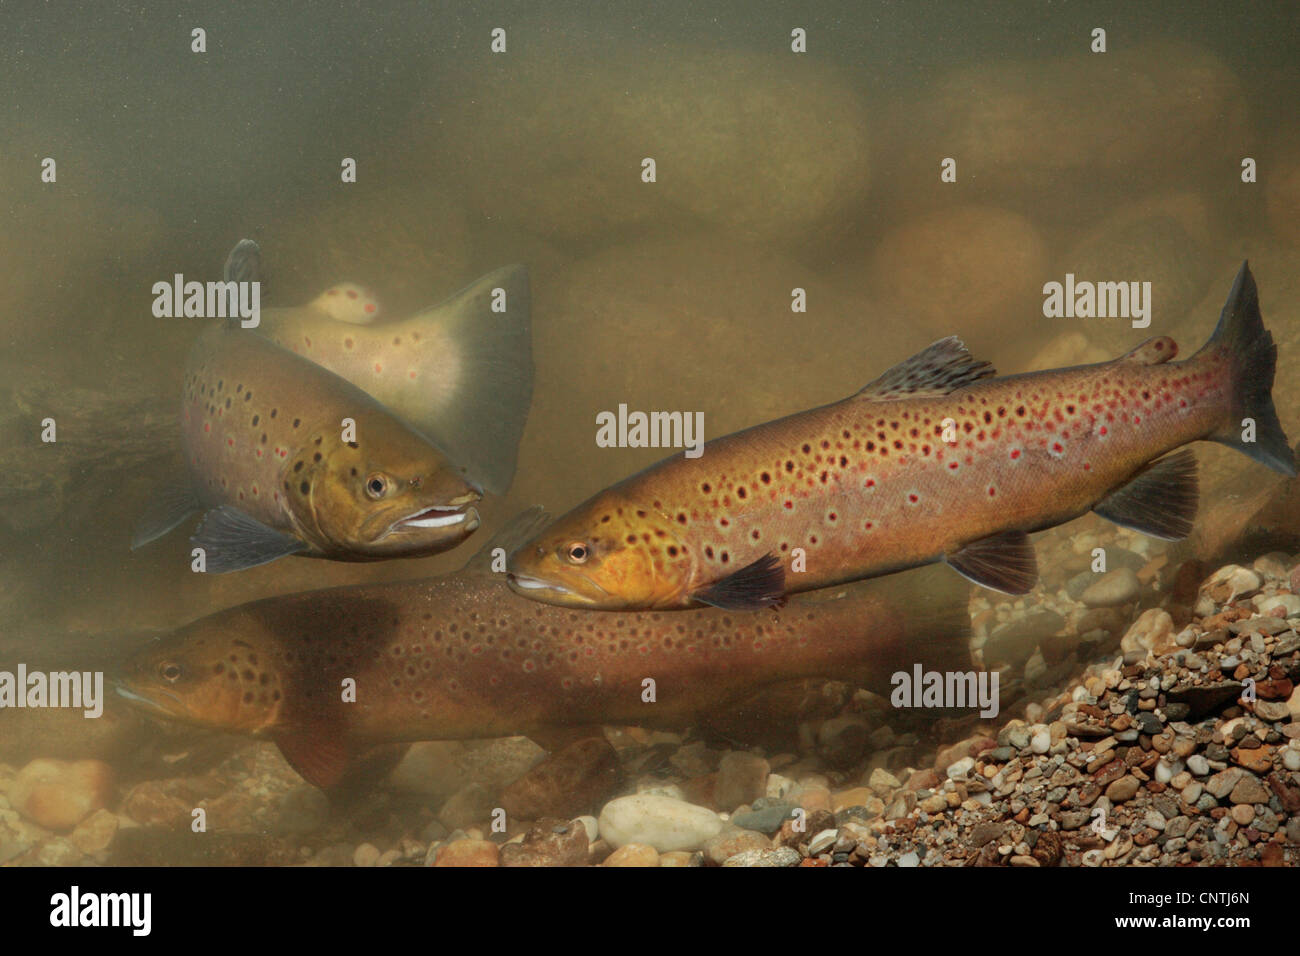 brown trout, river trout, brook trout (Salmo trutta fario), some fishes over spawning place Stock Photo